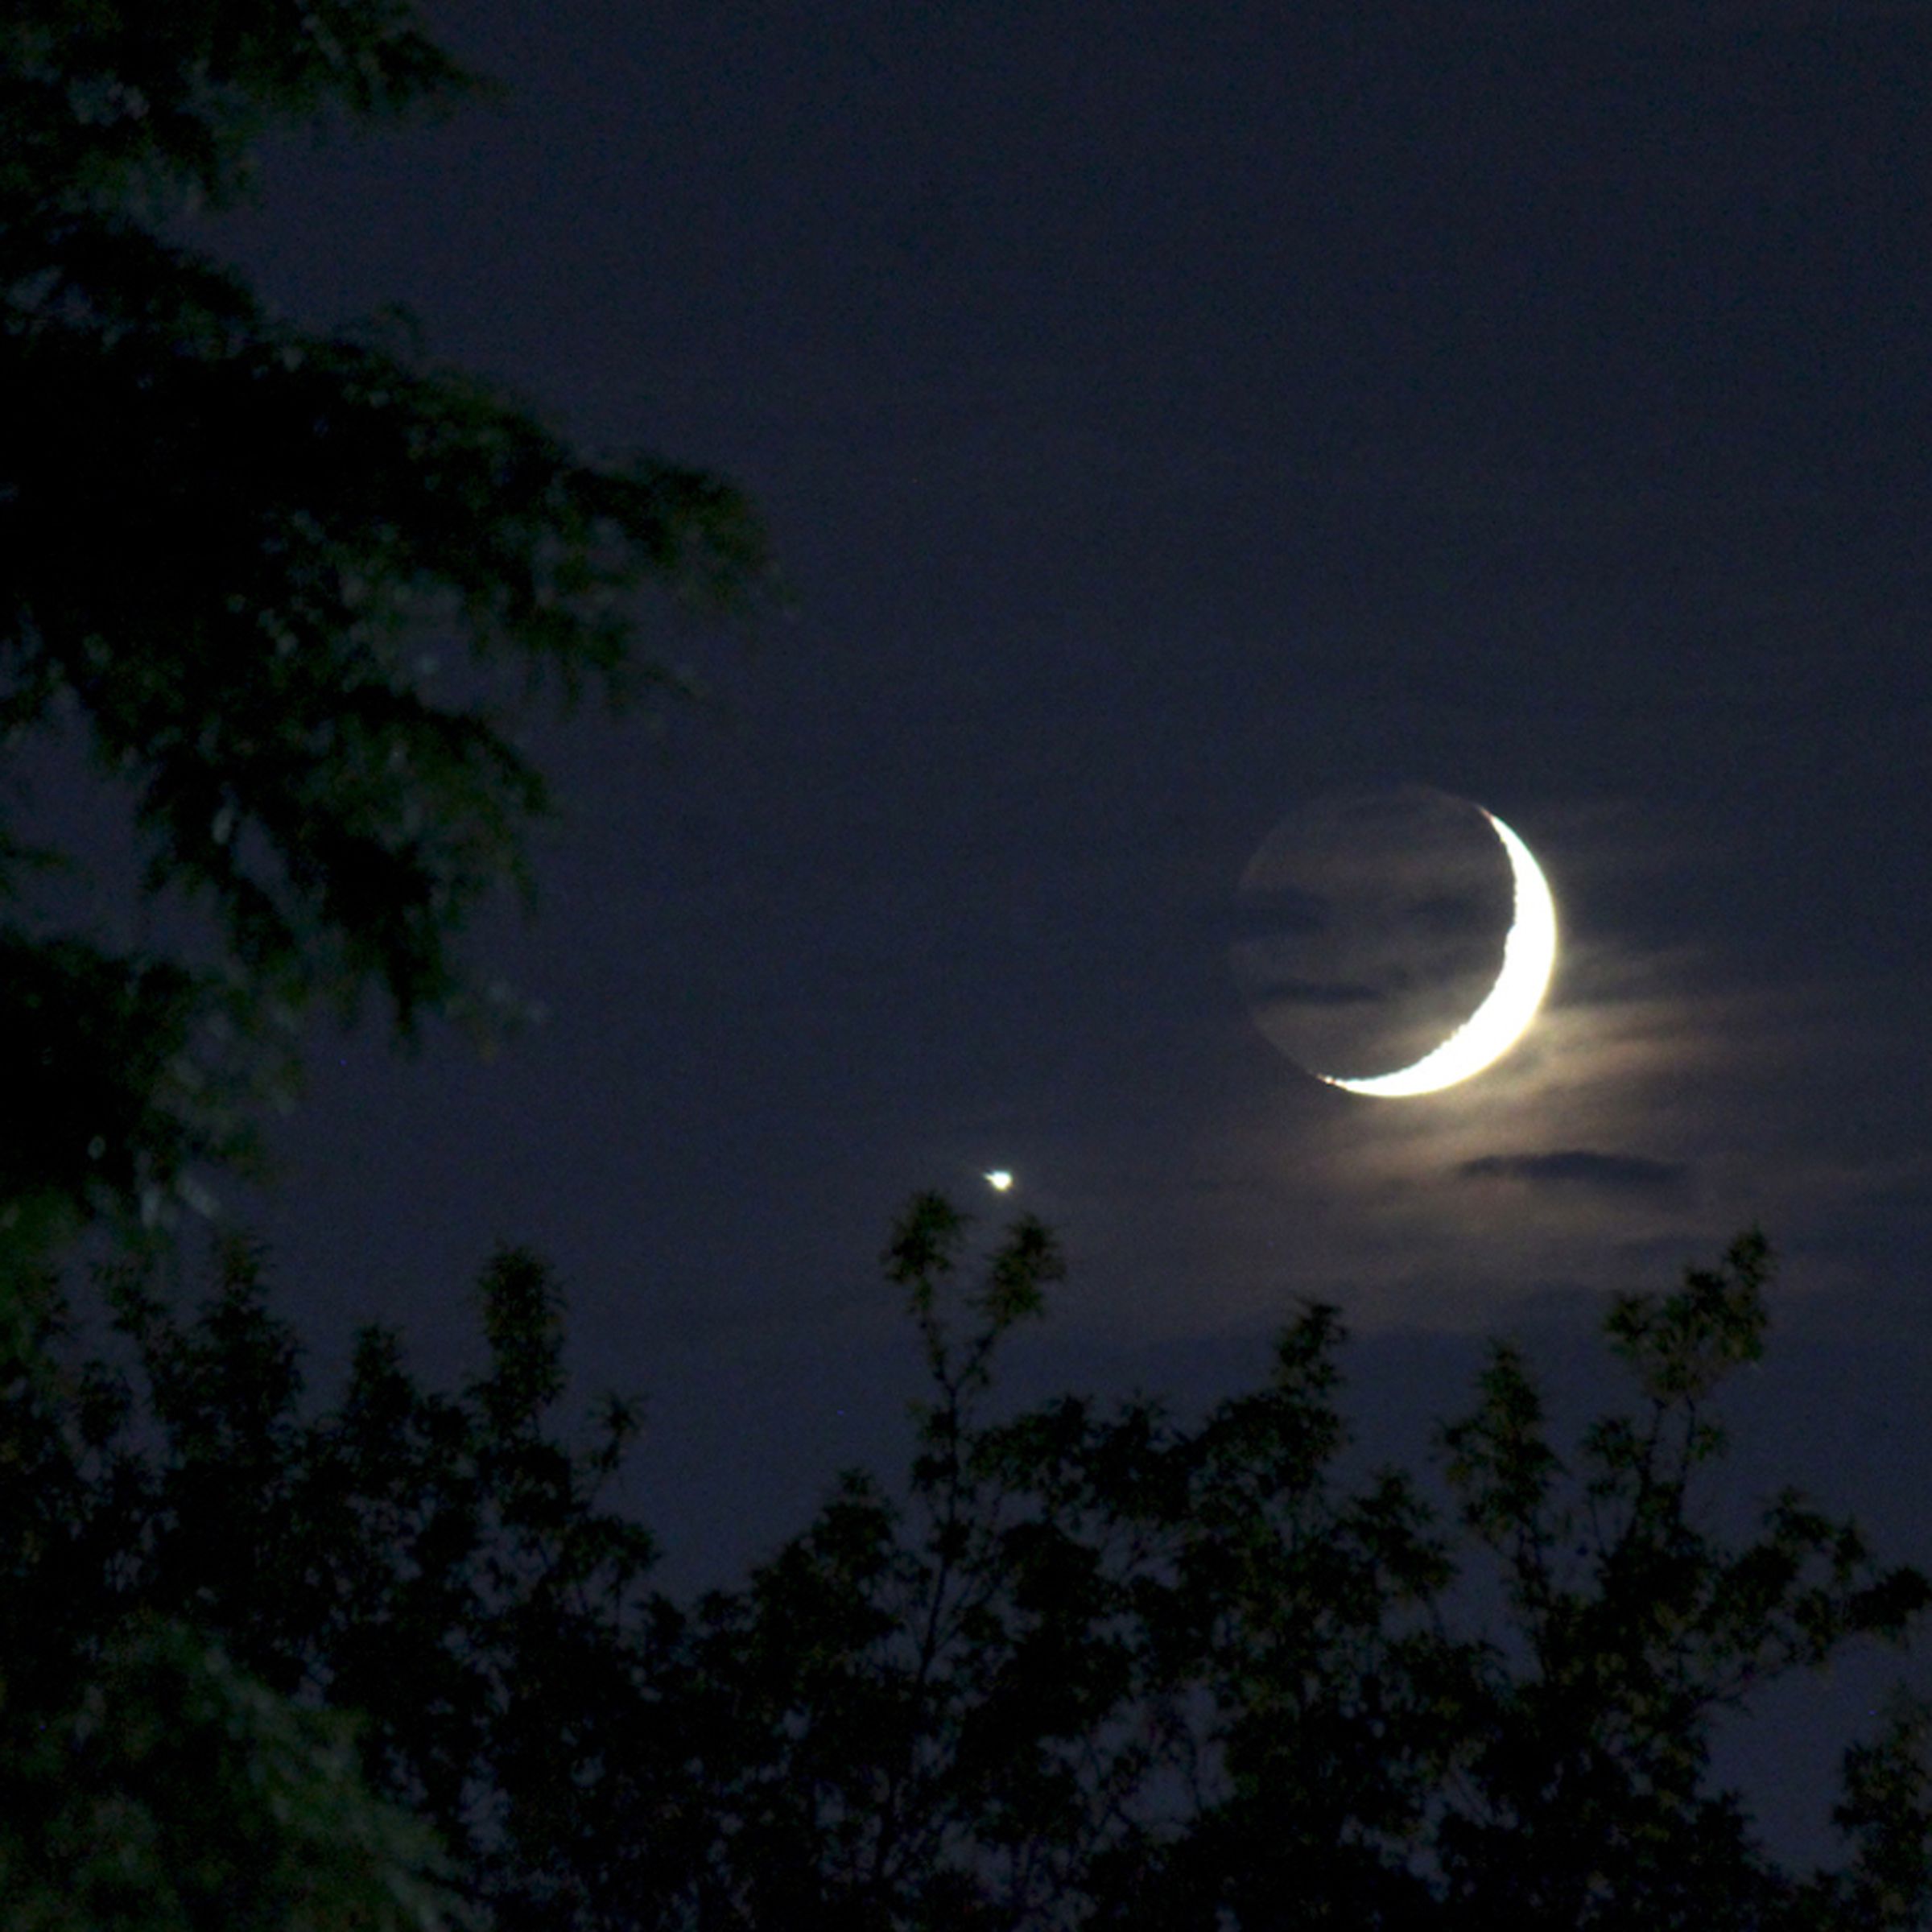 Venus beside a crescent Moon on July 15th, 2018.